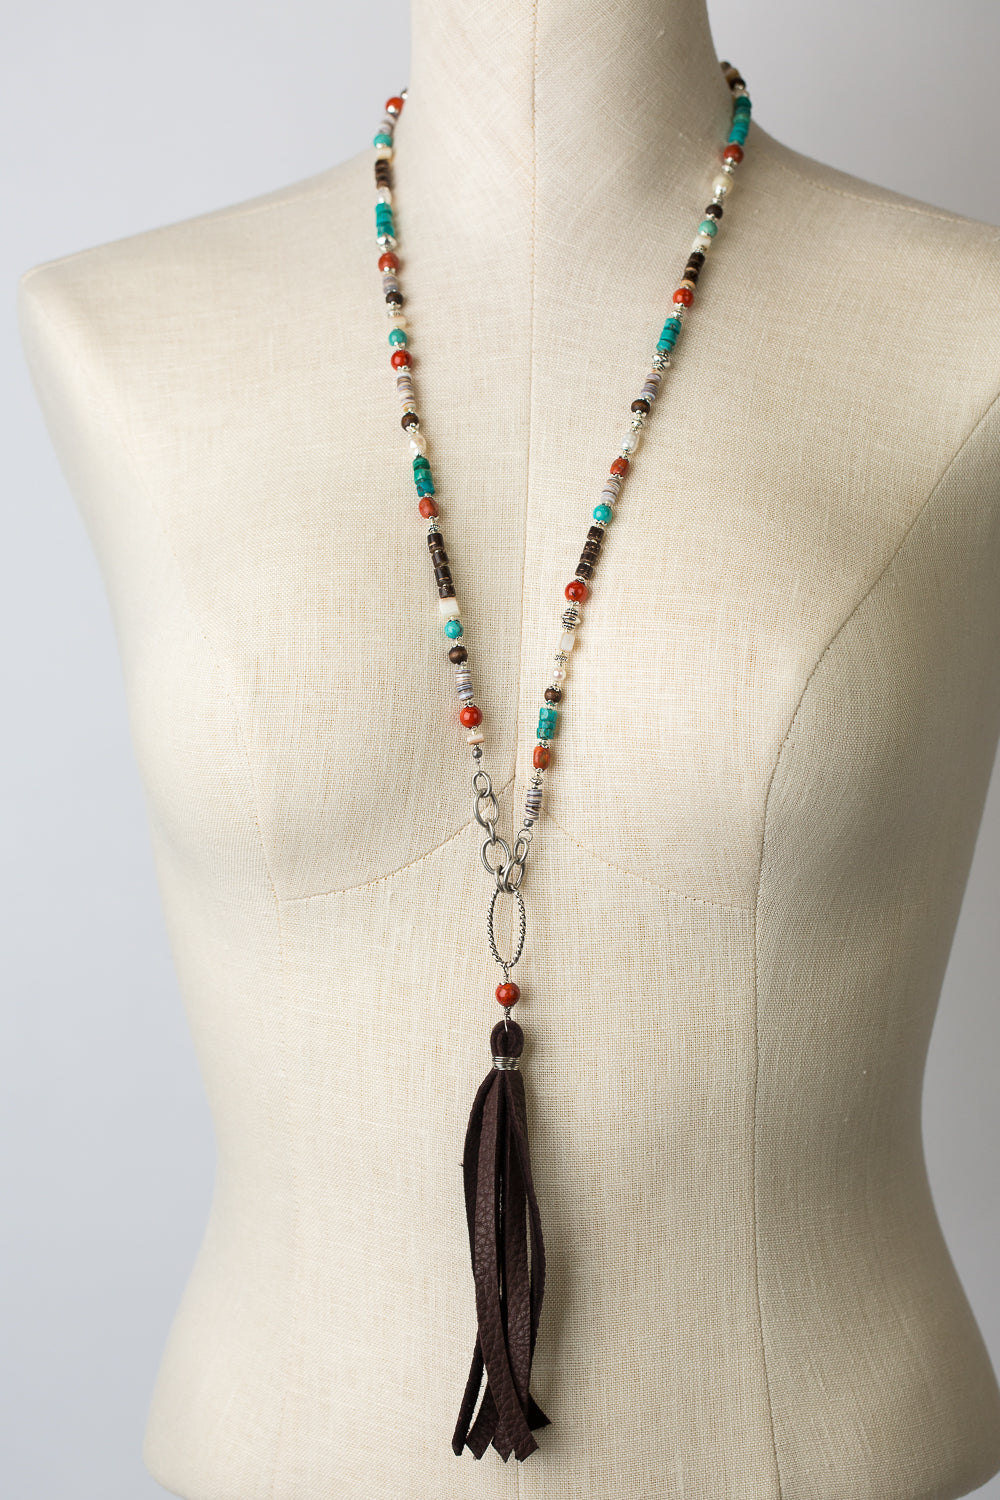 One of a Kind 26-28" Turquoise, Coral, Shell Tassel Necklace